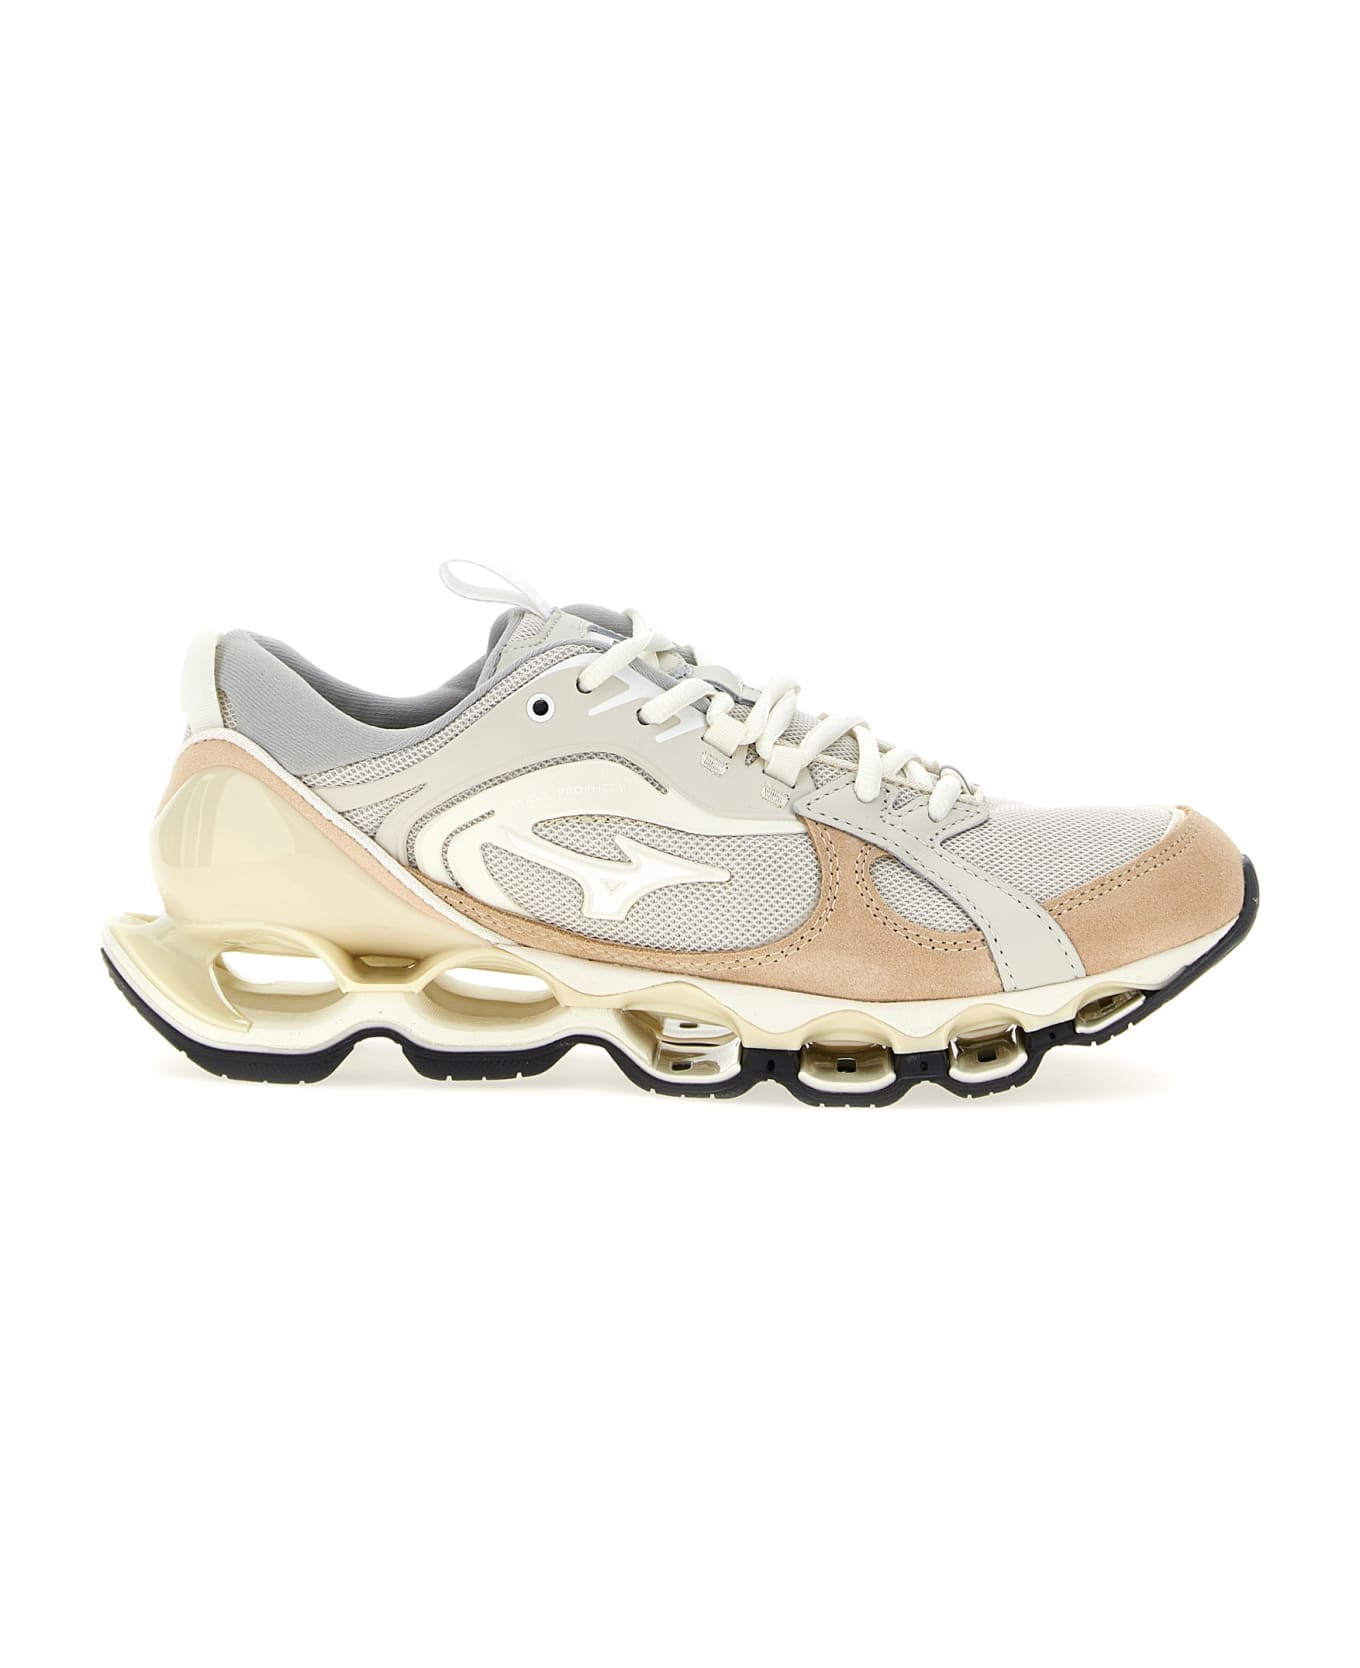 Mizuno 'wave Prophecy B2' Sneakers - White Sand スニーカー